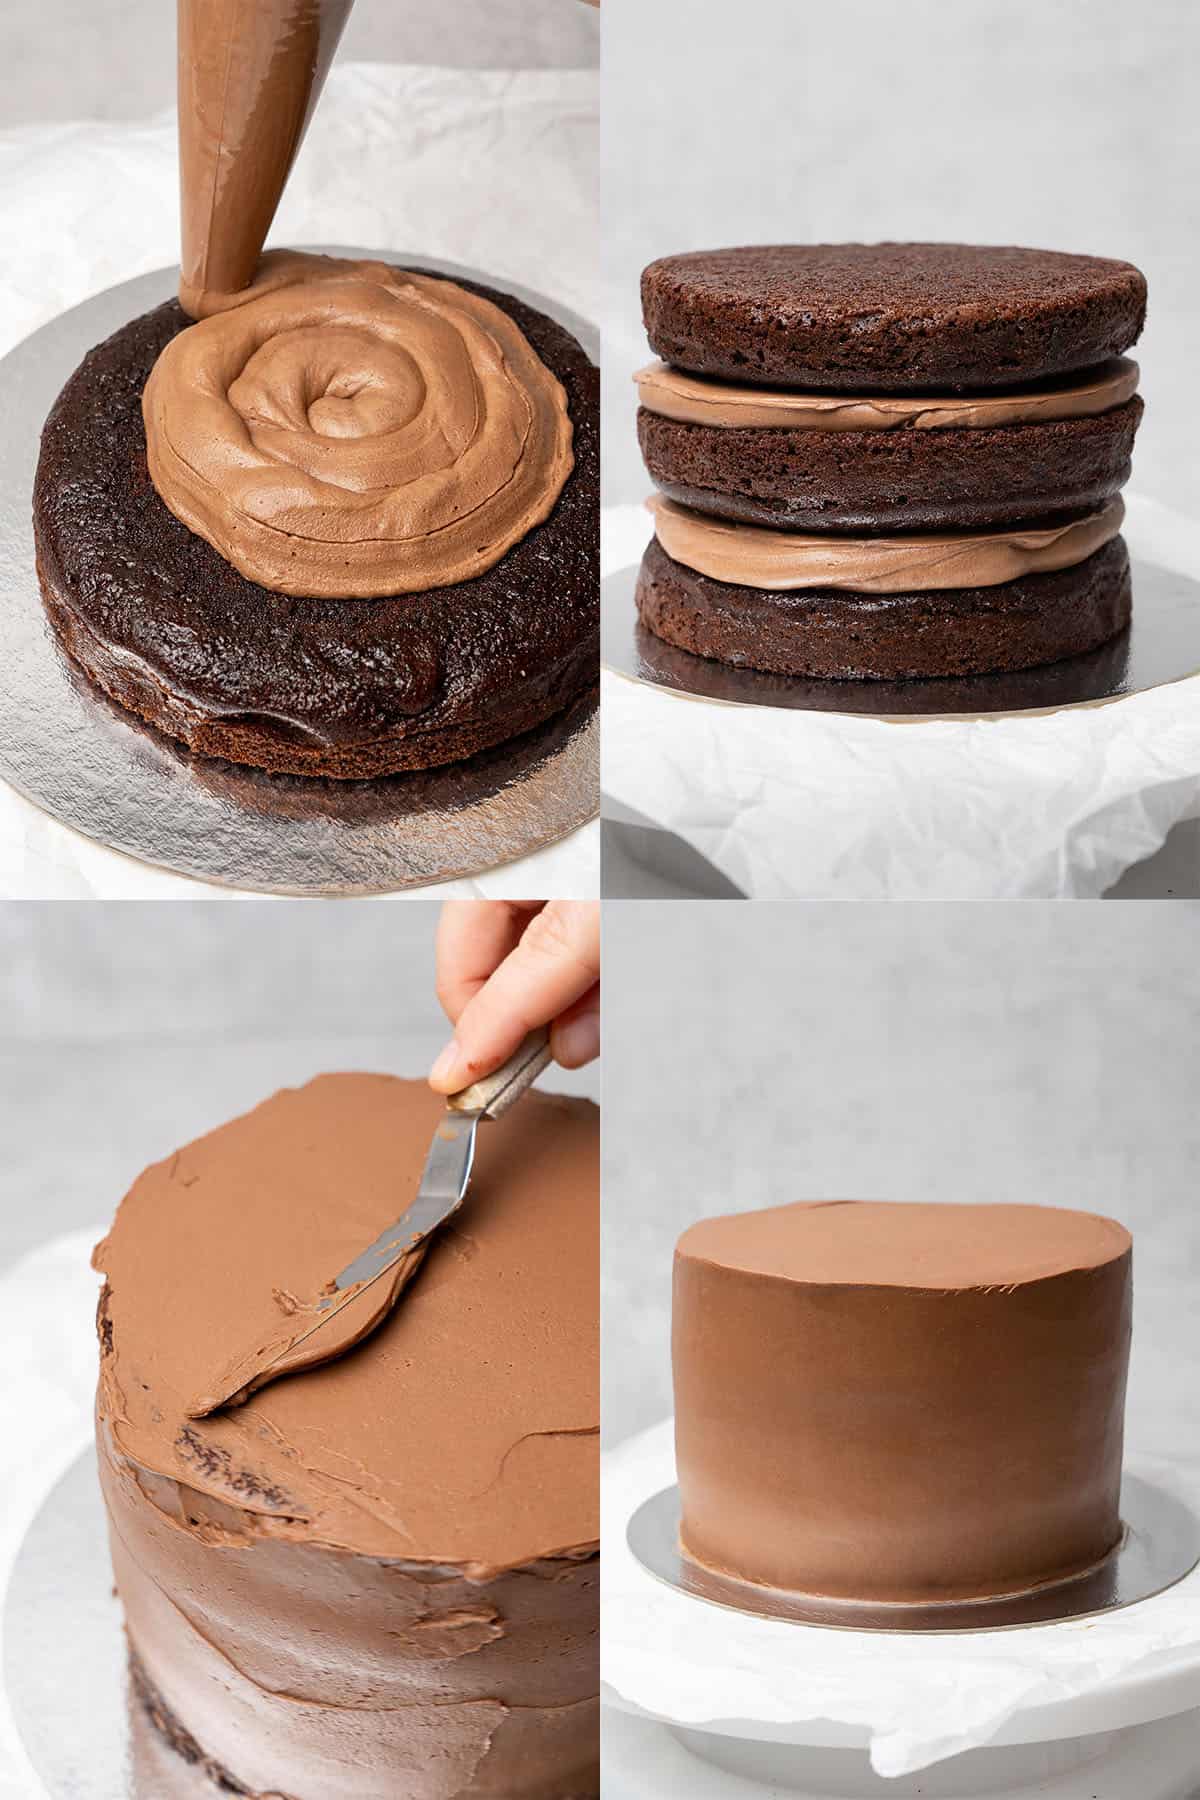 Triple chocolate cake assembly.